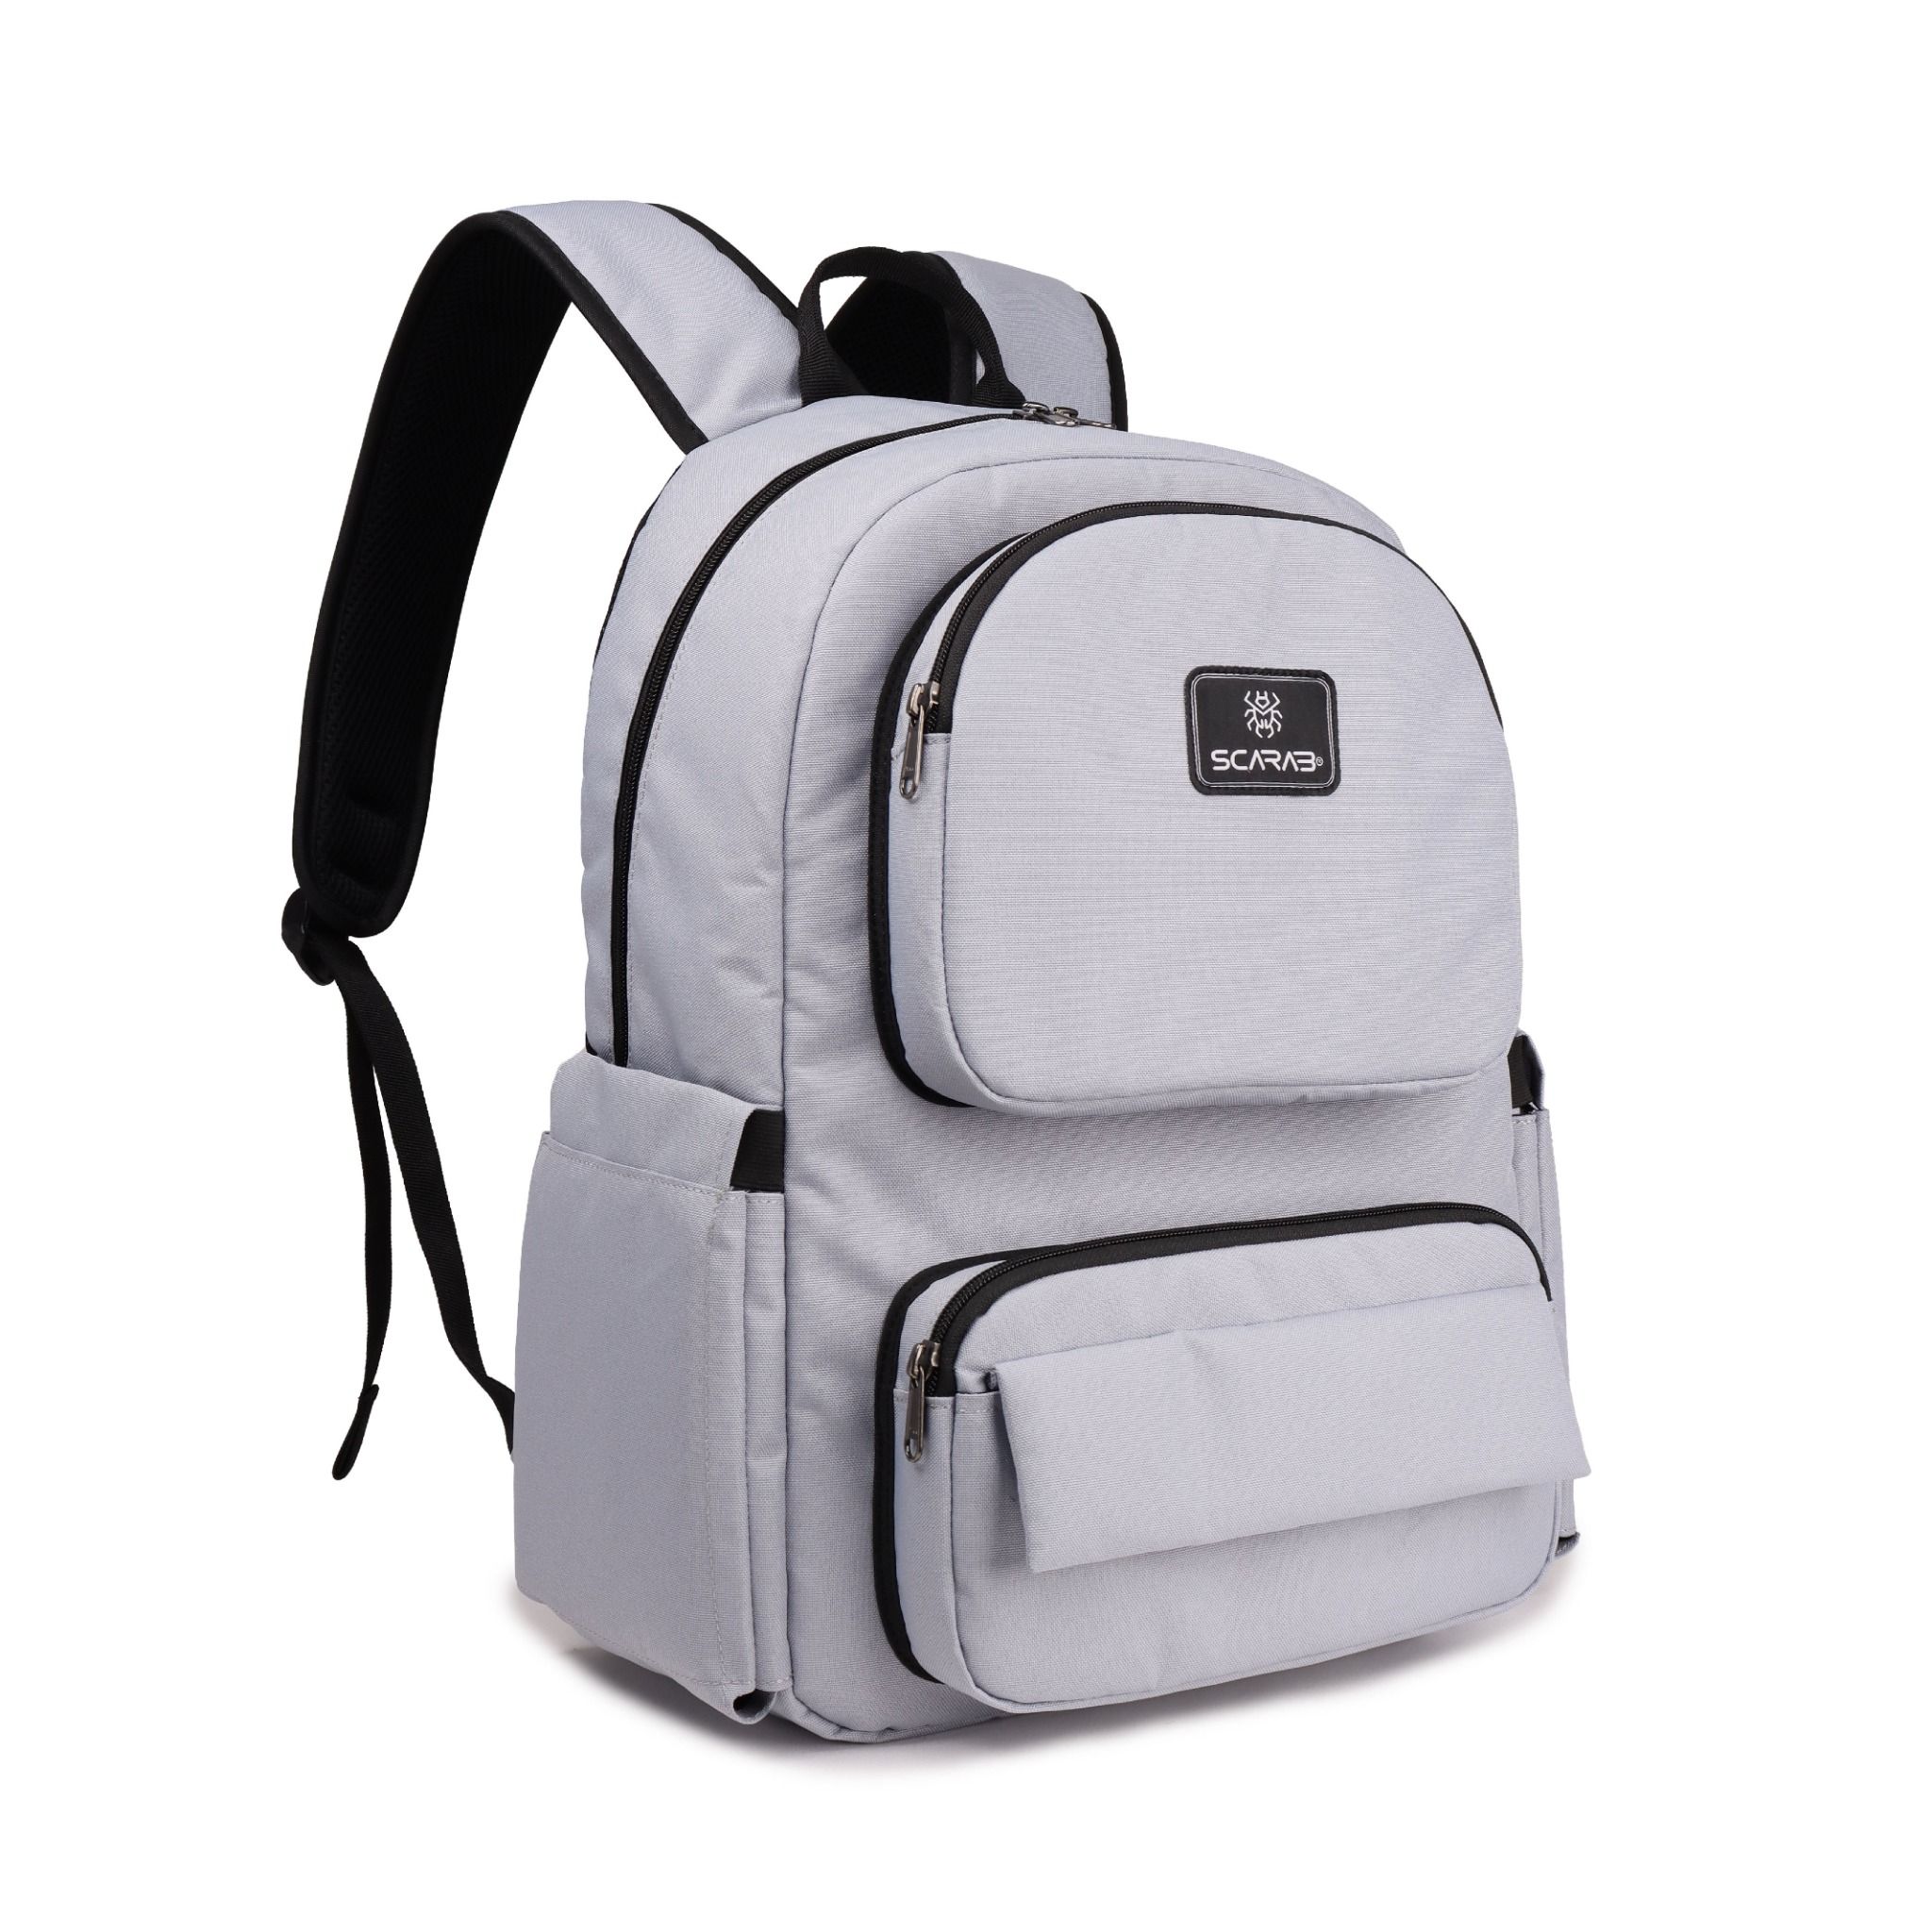  FUSSY VERSION 2 BACKPACK - COOL GREY 